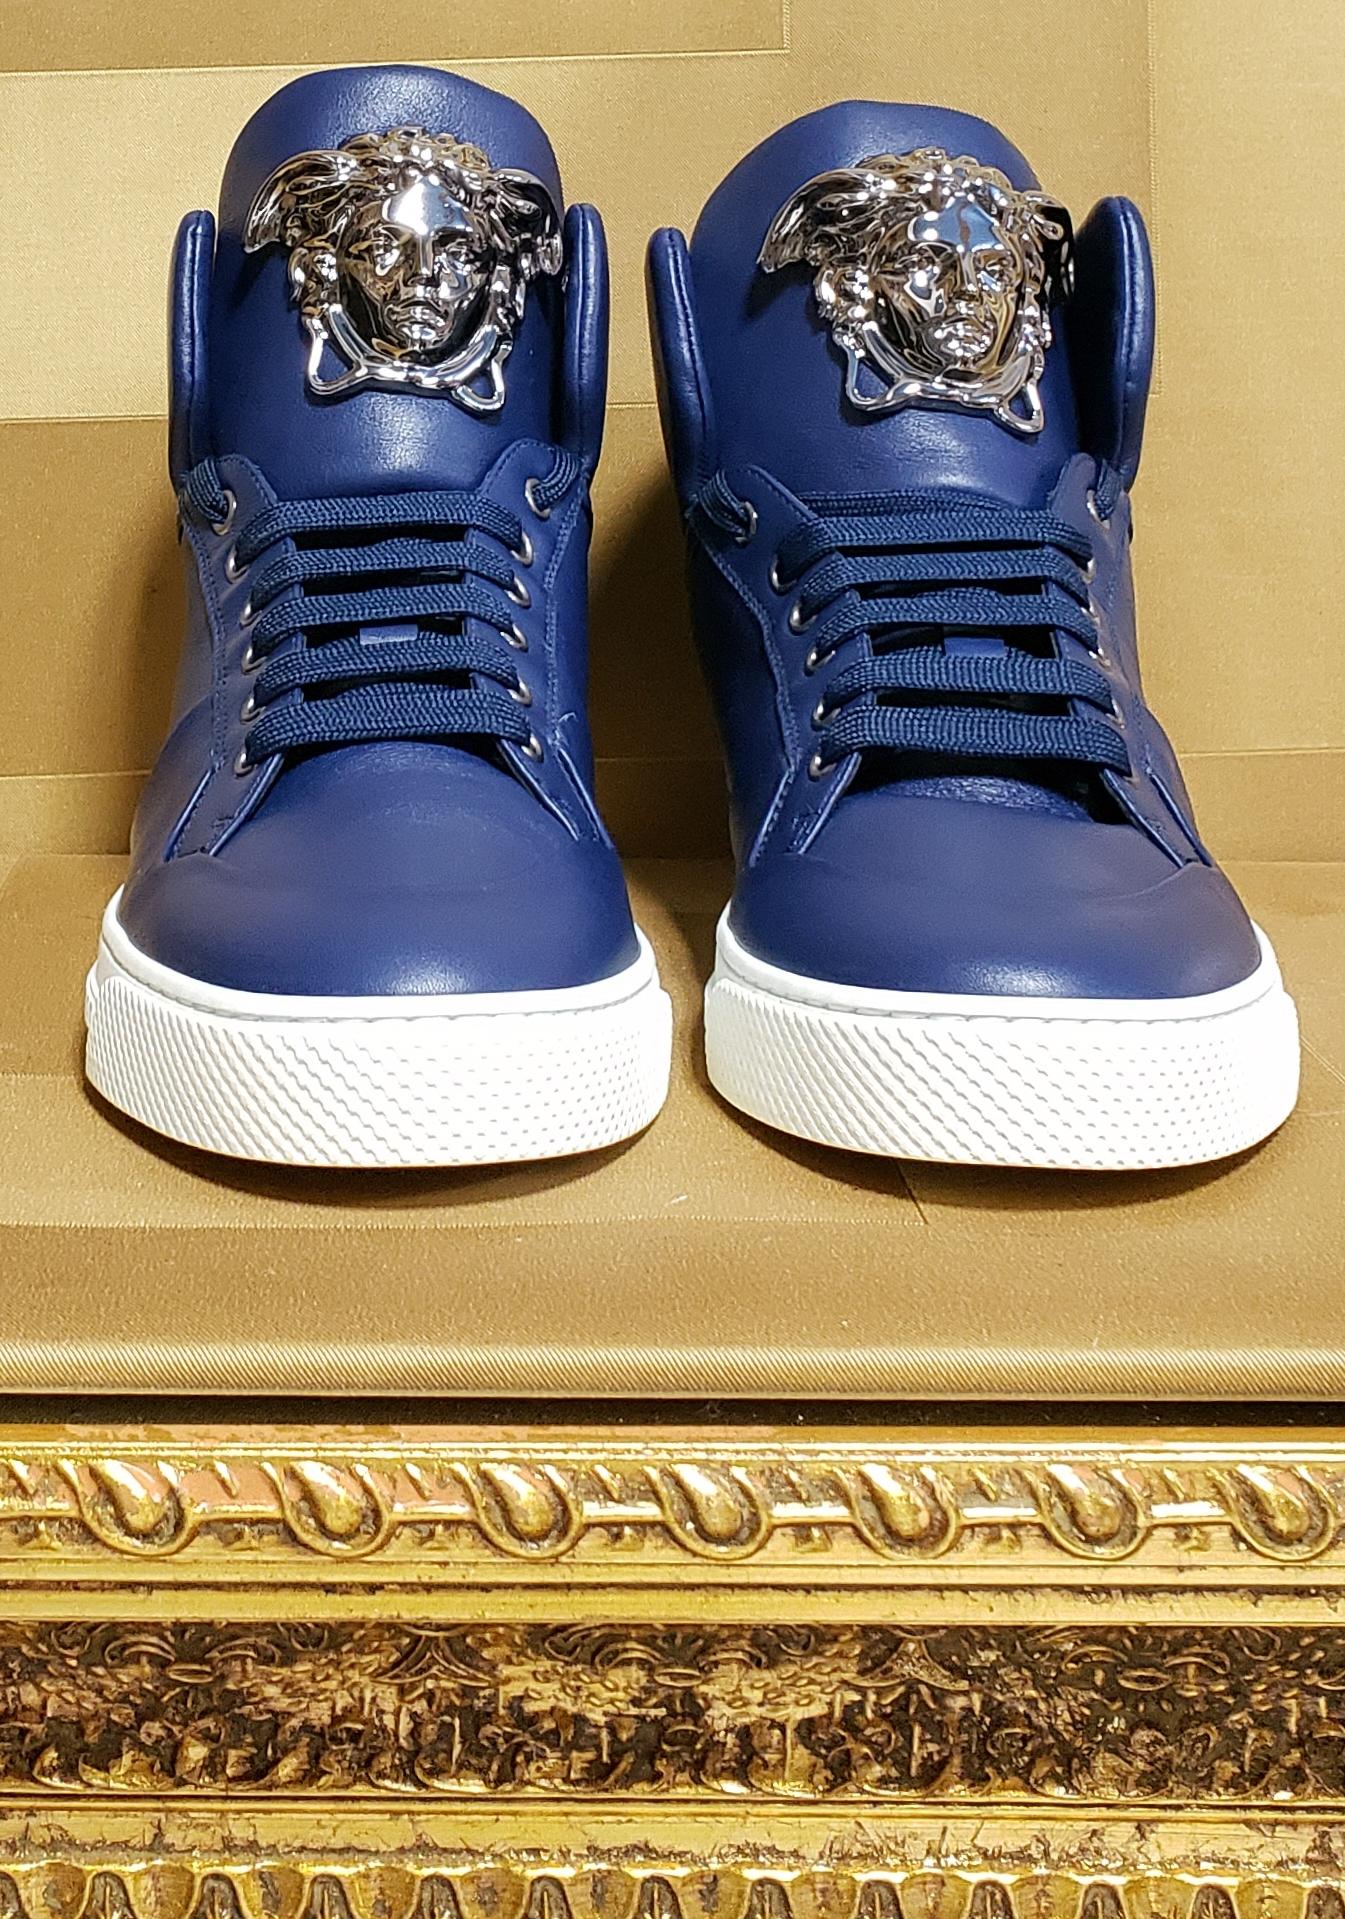 Blue VERSACE DARK BLUE LEATHER PALAZZO HIGH-TOP Sneakers